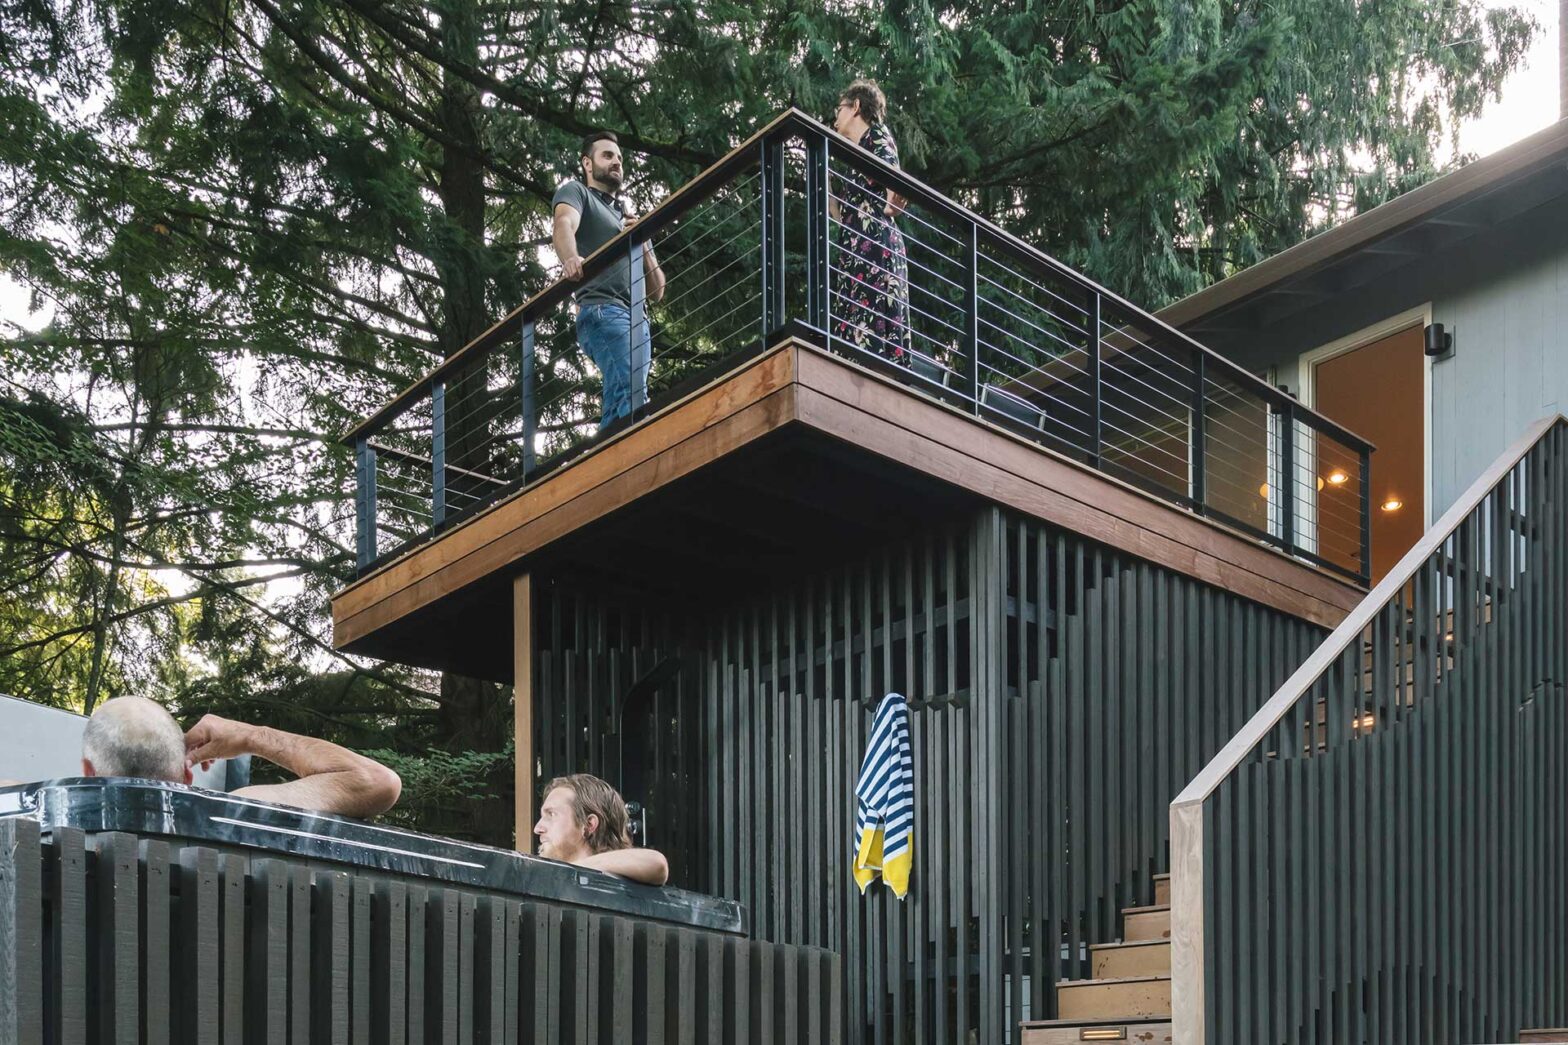 The Hillsdale Deck is a multi-level deck with spaces for gathering, dining, and hot-tubbing.